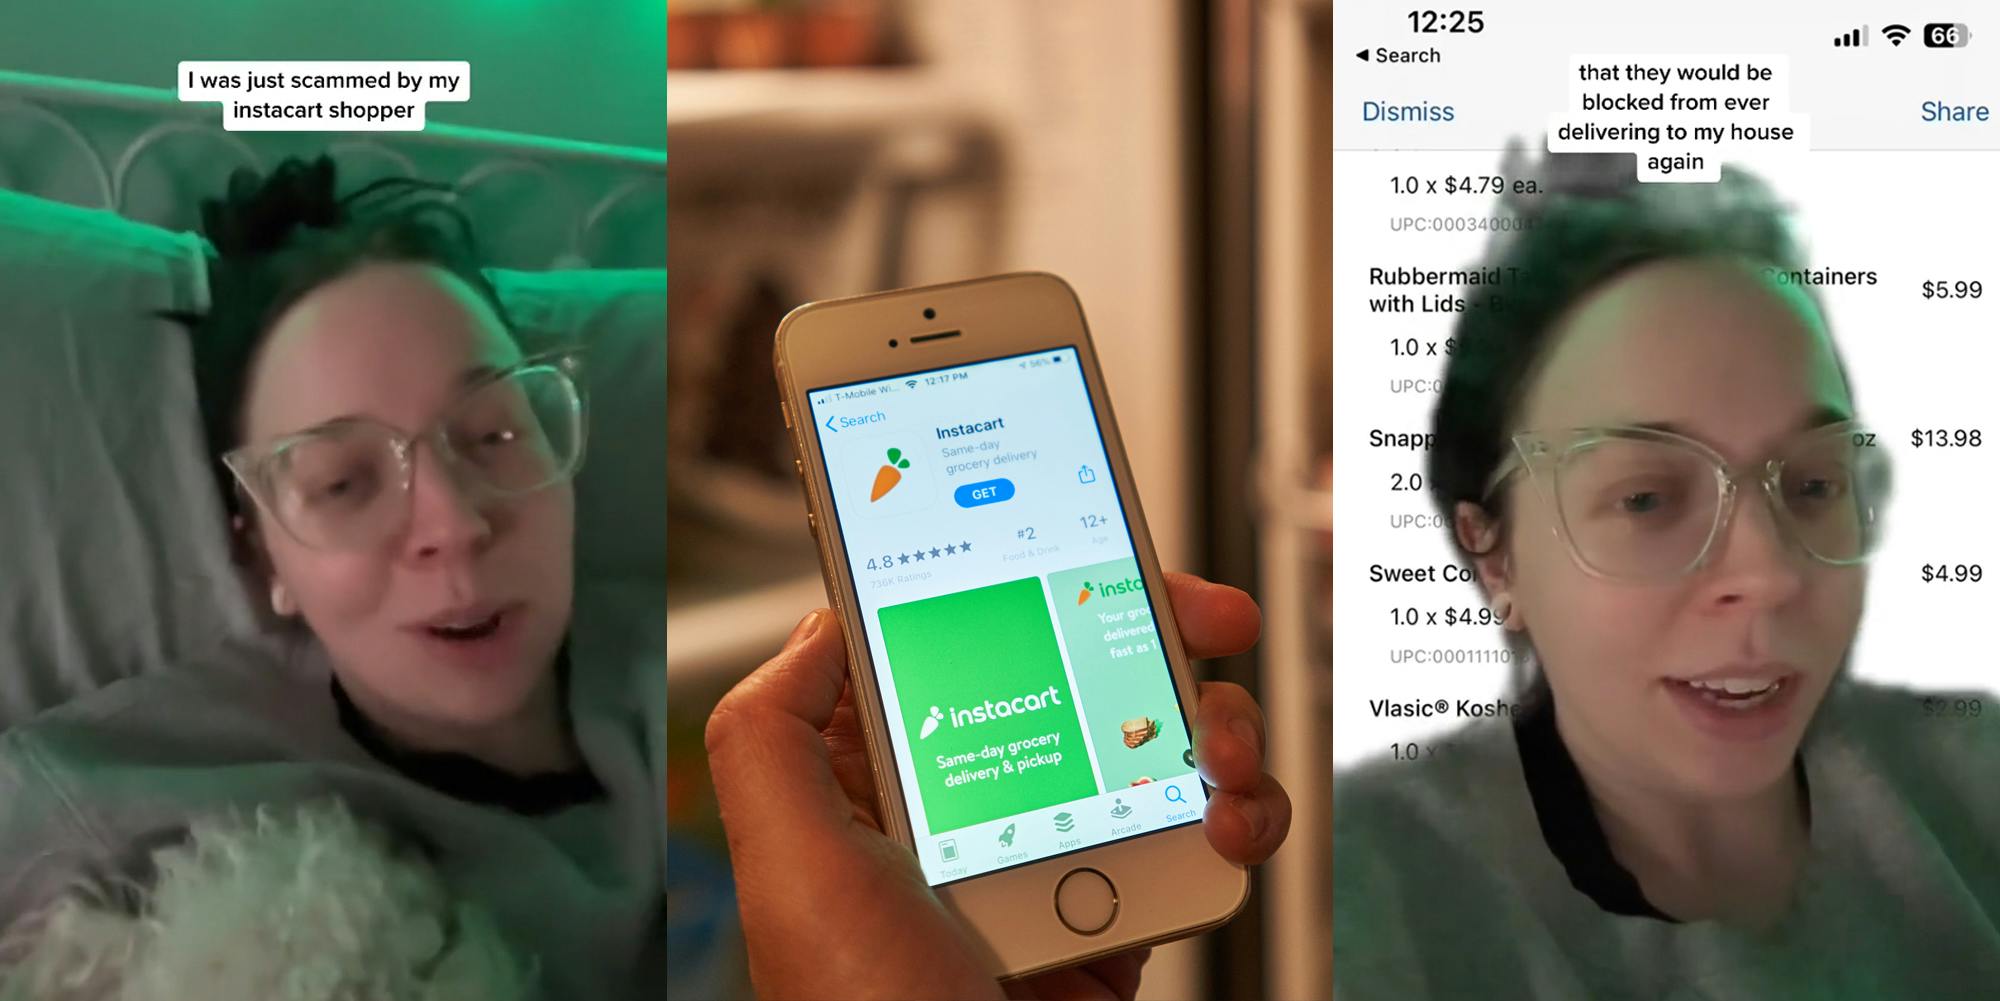 woman speaking in bed with caption "I was just scammed by my instacart shopper" (l) hand holding phone with Instacart in appstore in front of open fridge (c) woman greenscreen TikTok over Kroger Instacart list of items bought with caption "that they would be blocked from ever delivering to my house again" (r)